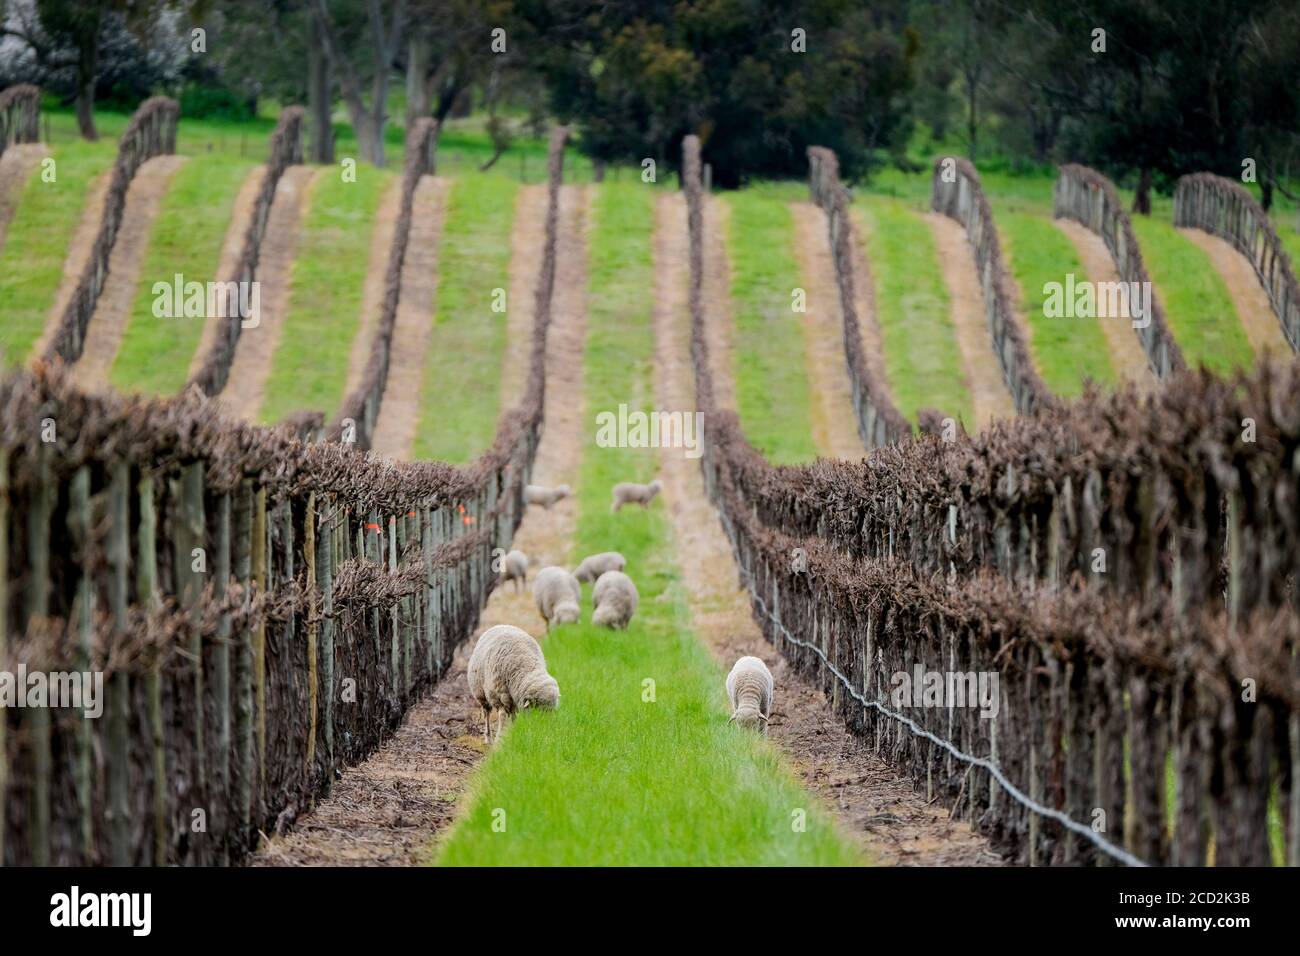 Sheep grazing between rows of grape vines in the Barossa Valley region of Australia Stock Photo